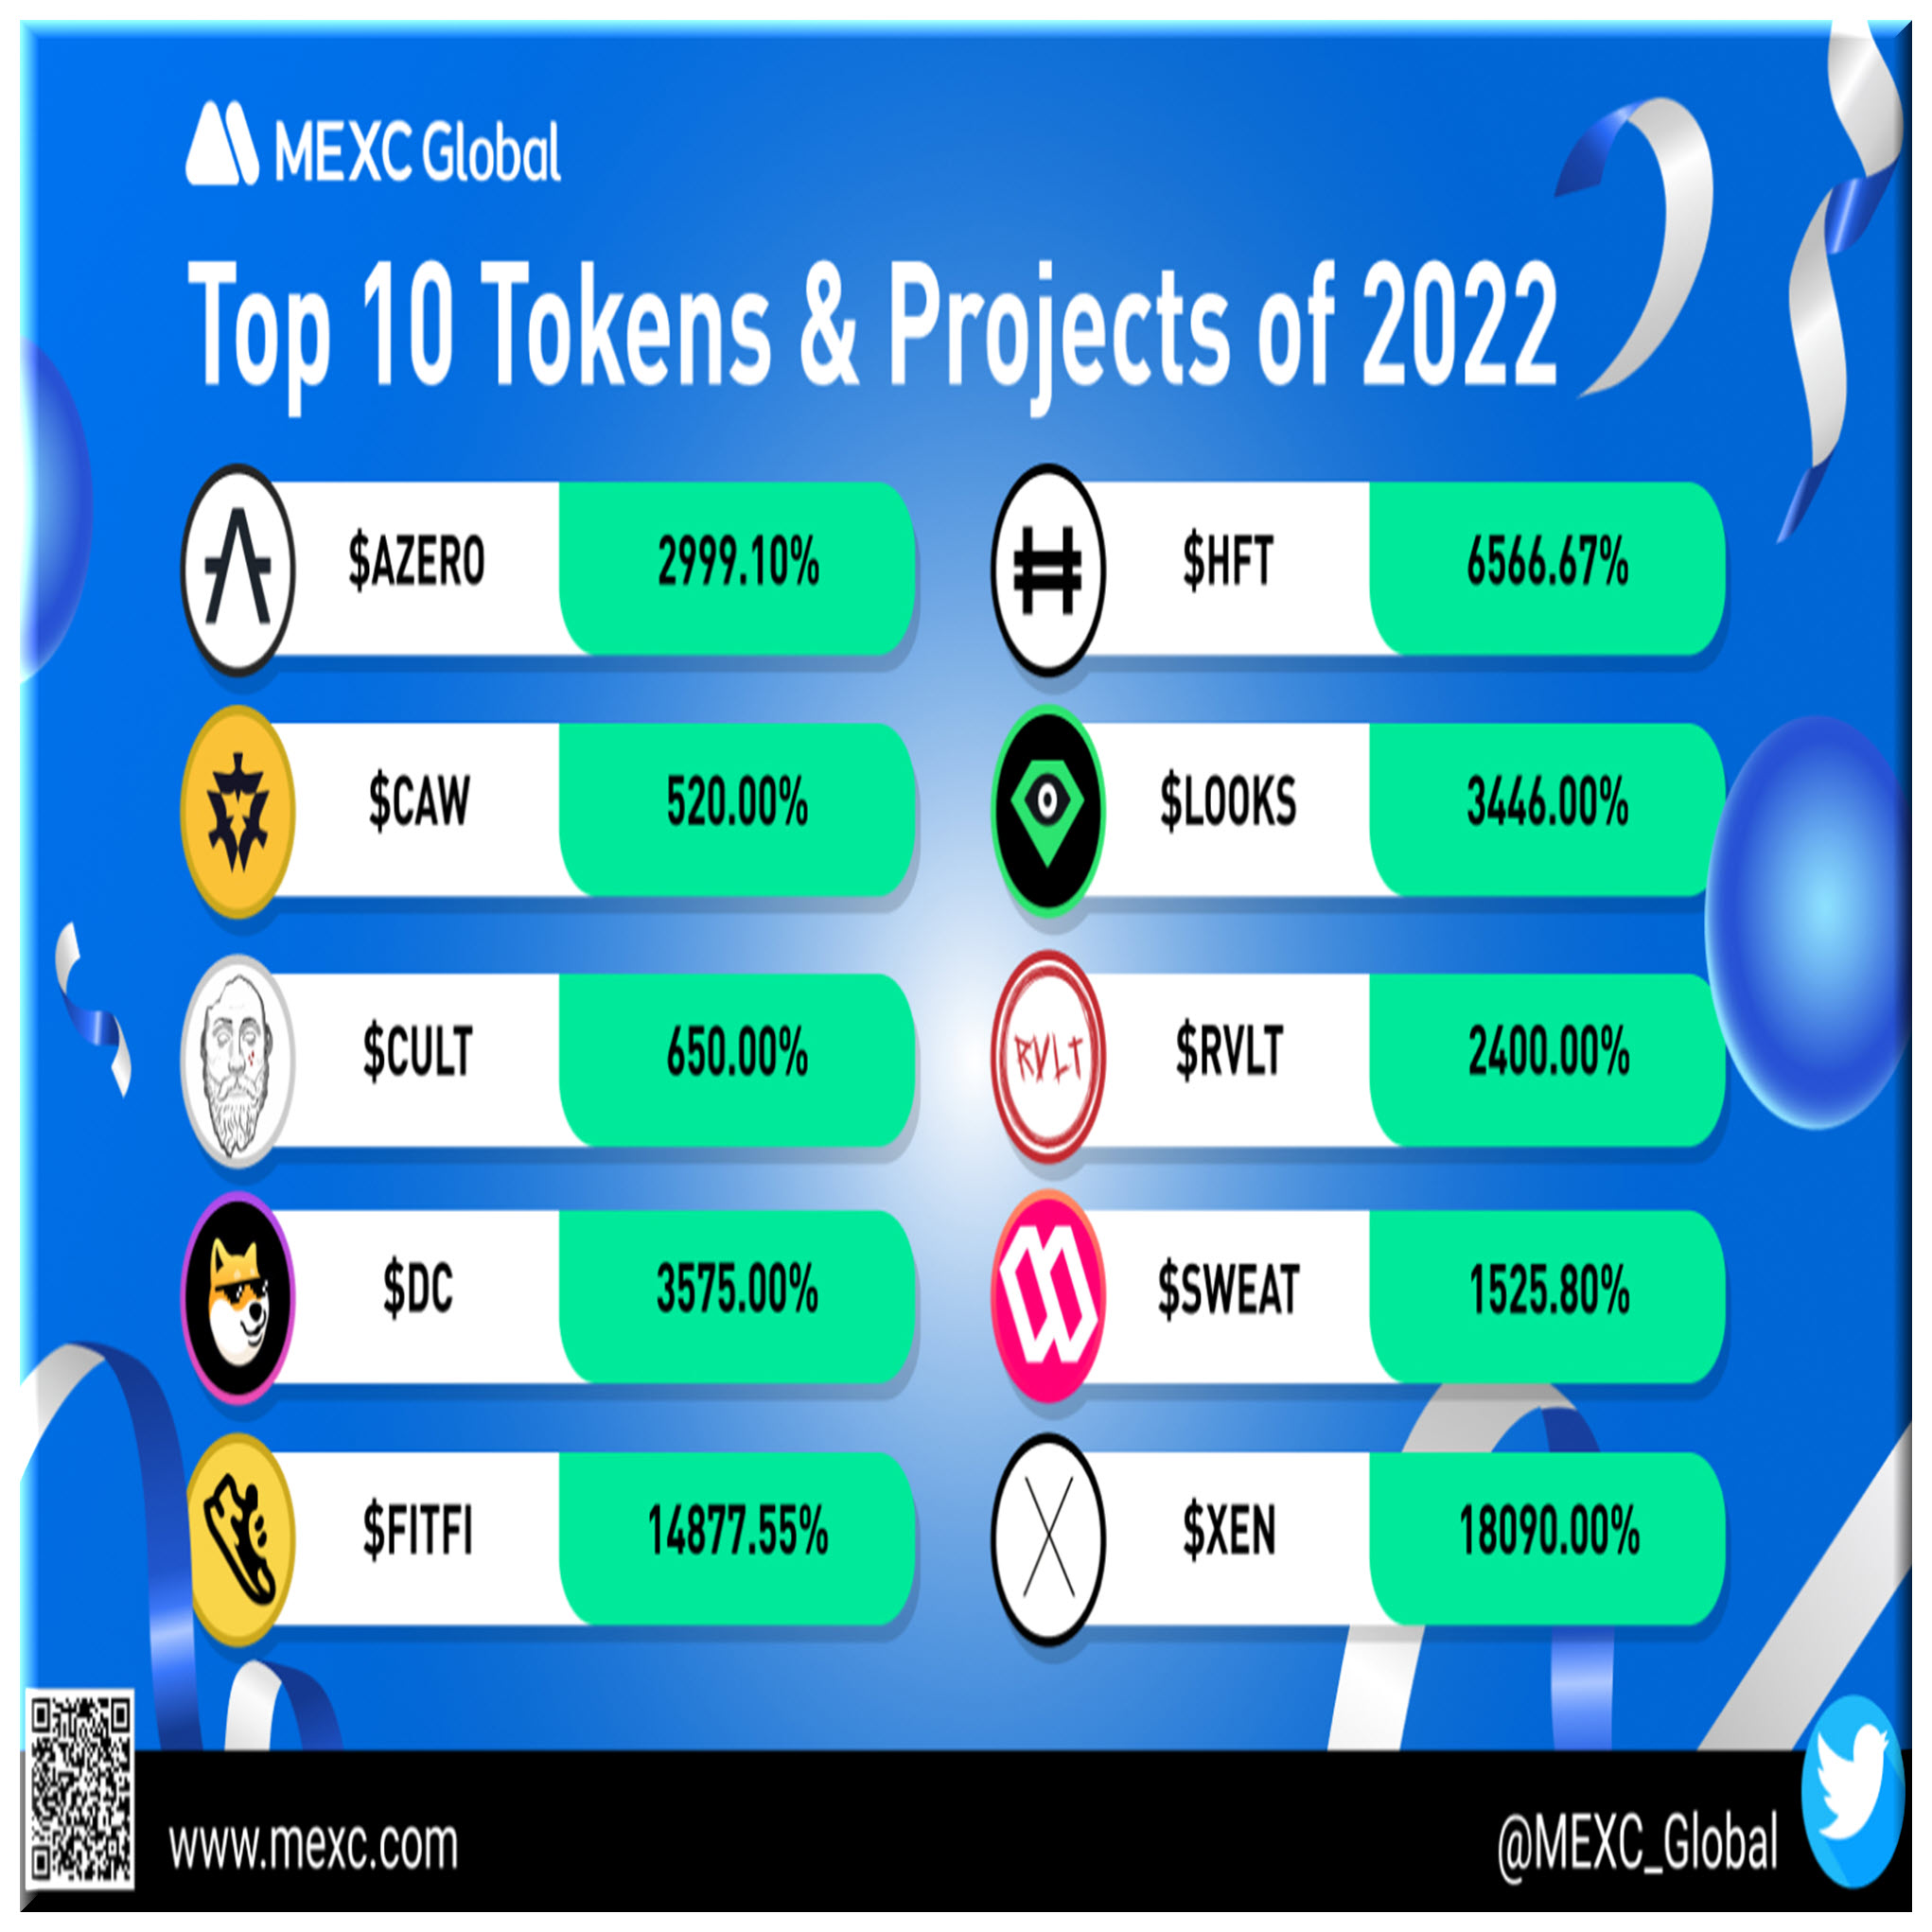 Guess who made it to the #MEXC's Top 10 Tokens & Projects of 2022 list